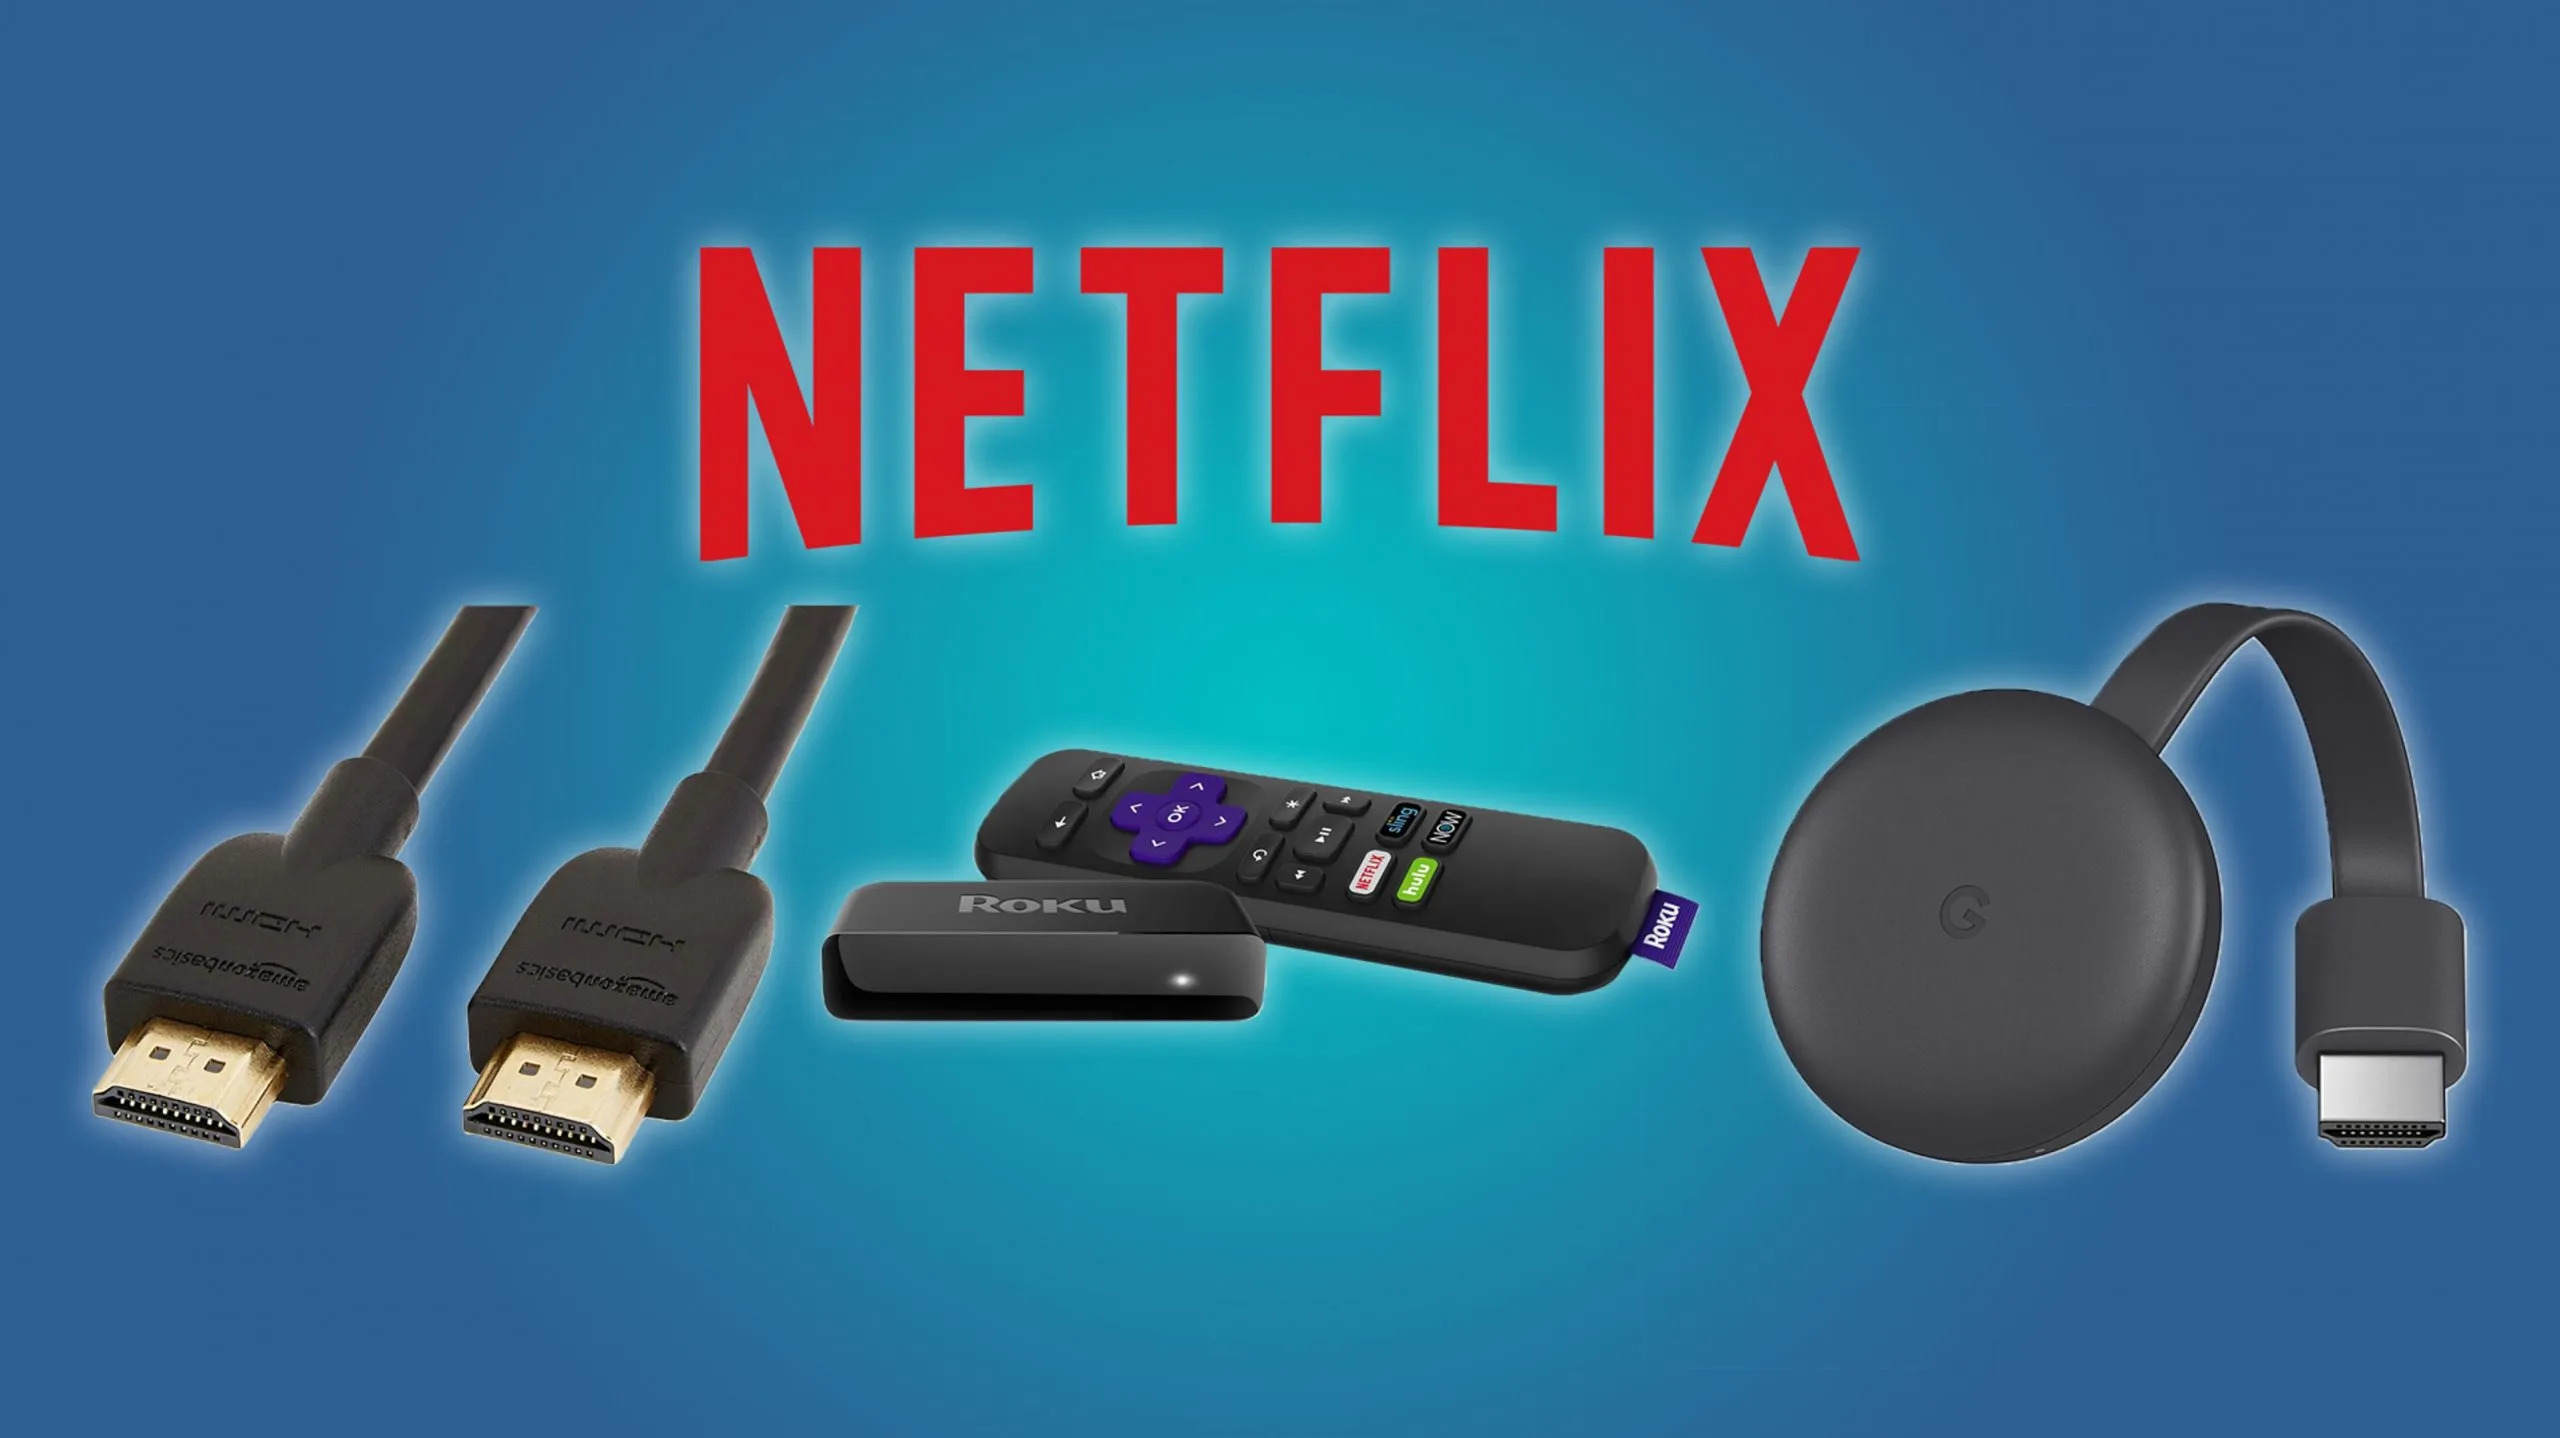 How To Get Netflix On A Non-Smart TV